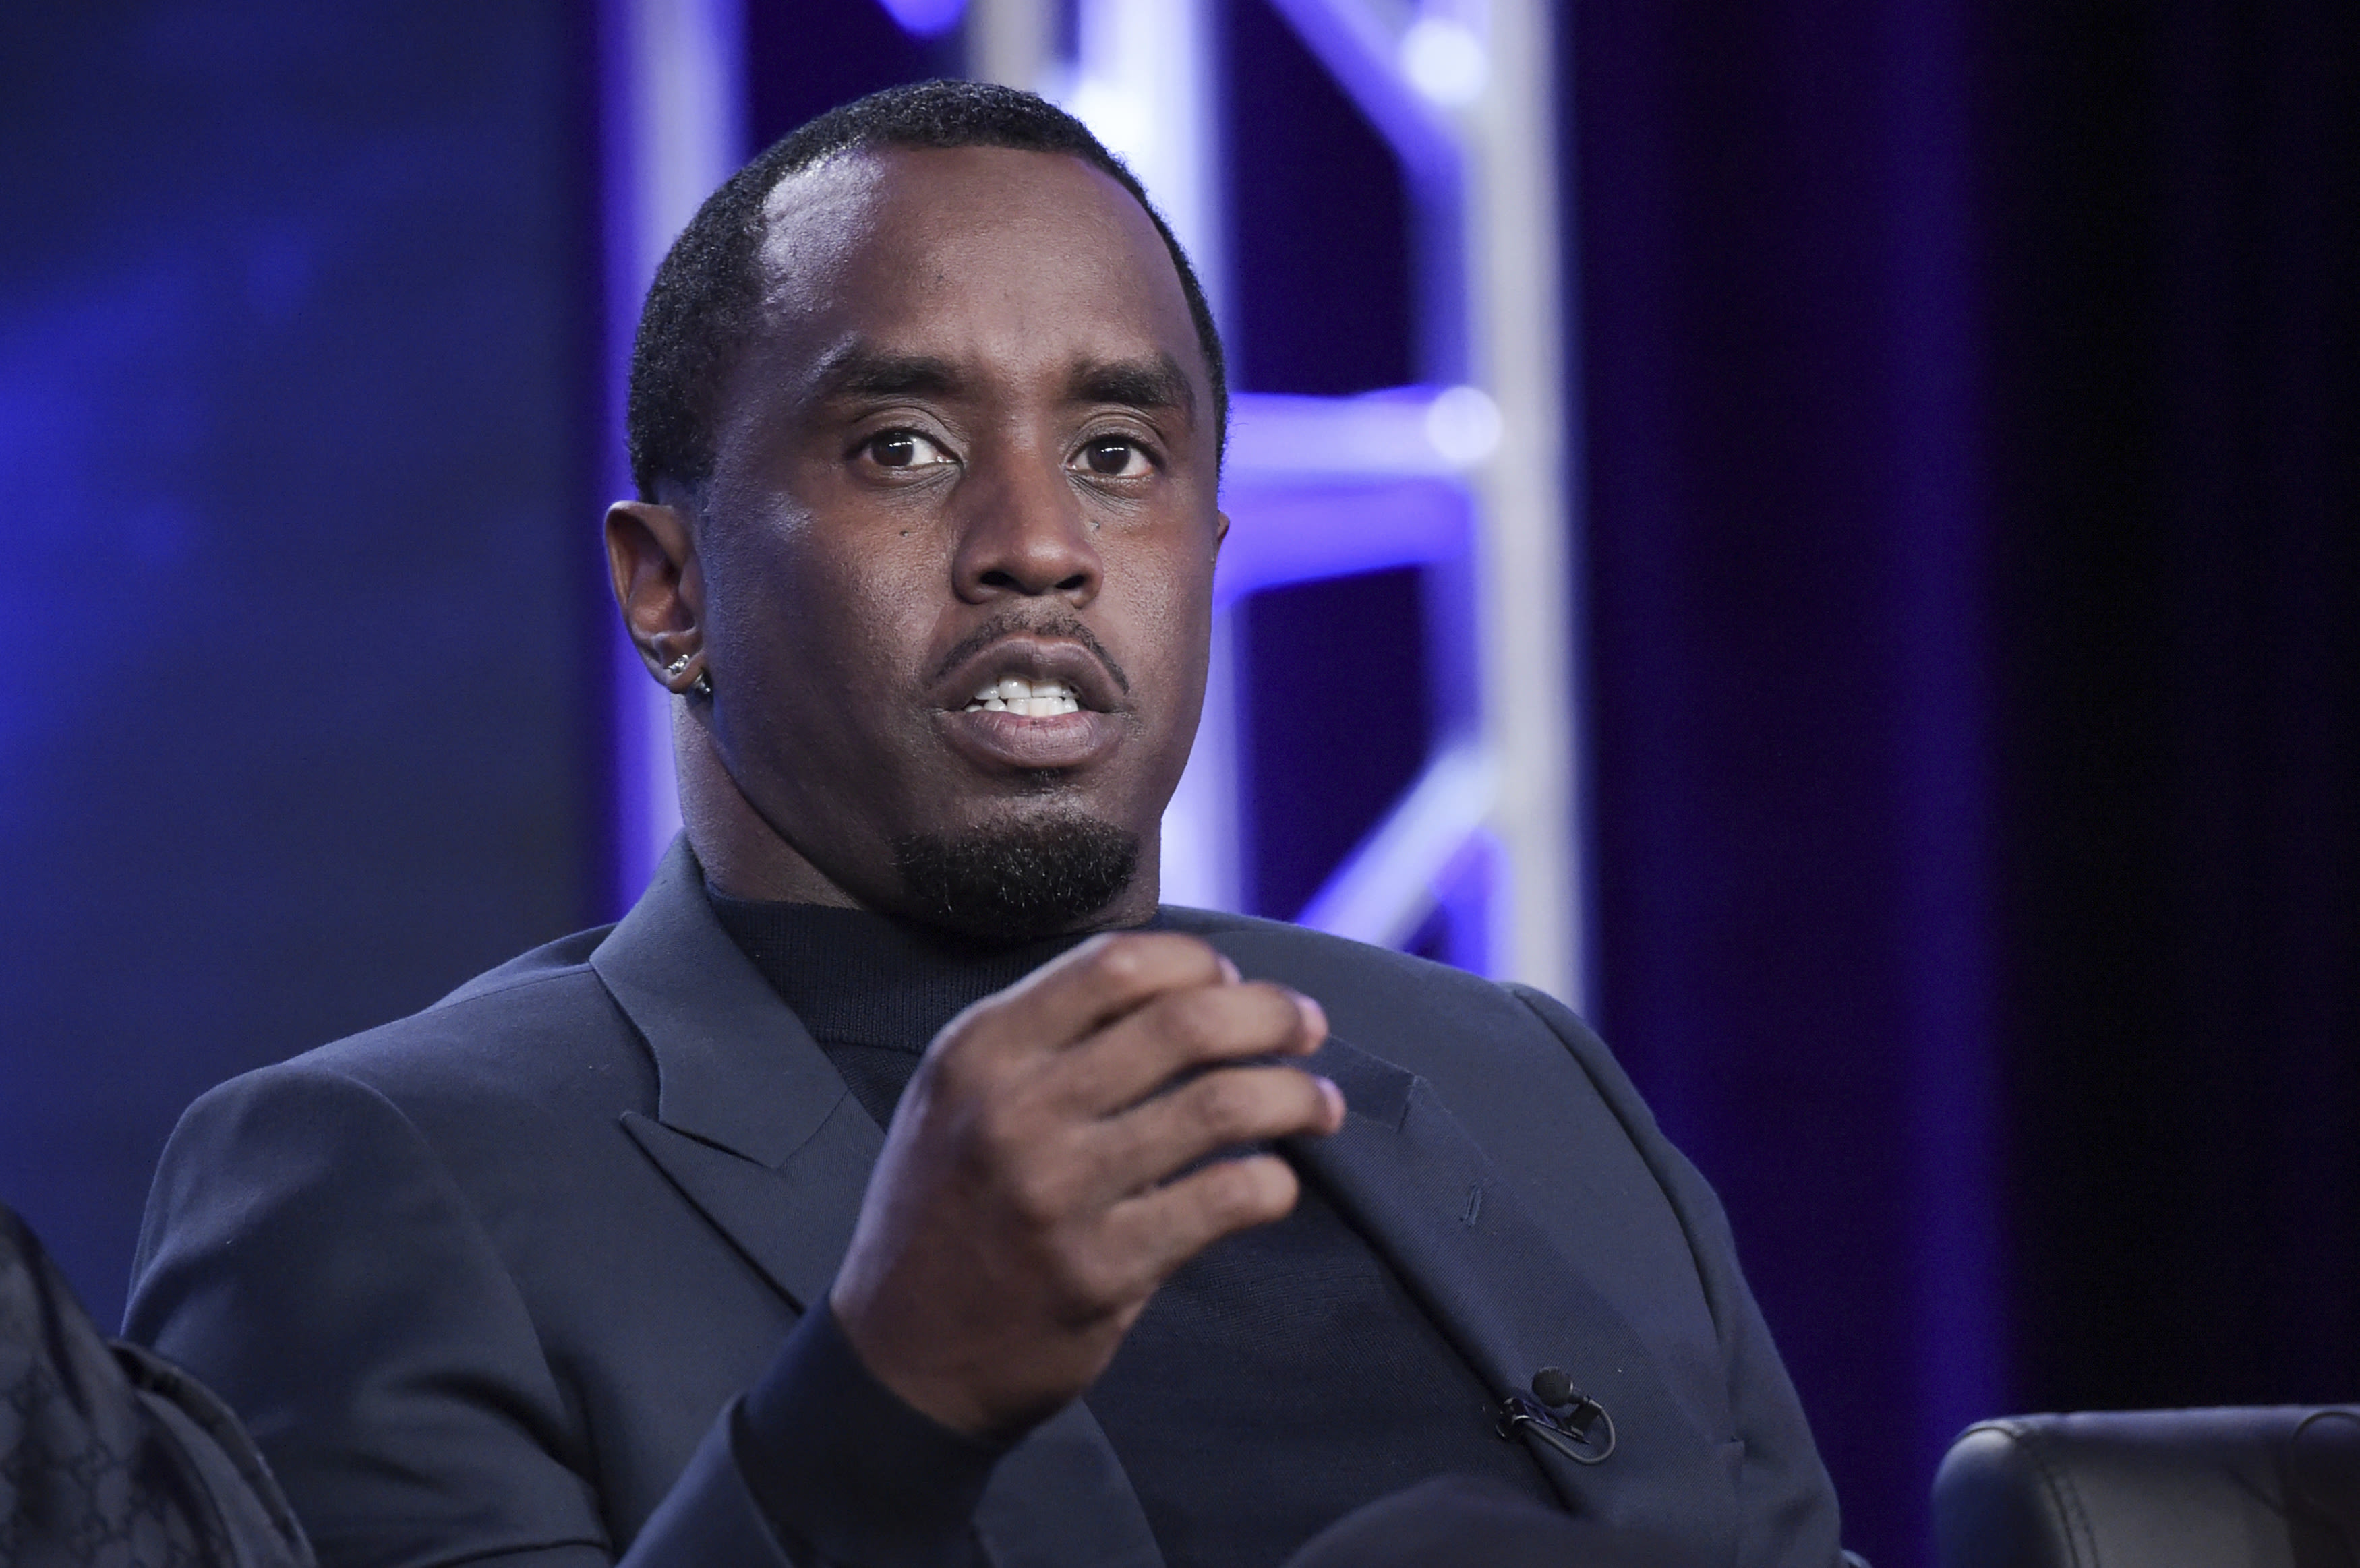 Amid allegations against Sean 'Diddy' Combs, lawmaker wants to expand domestic abuse prosecutions